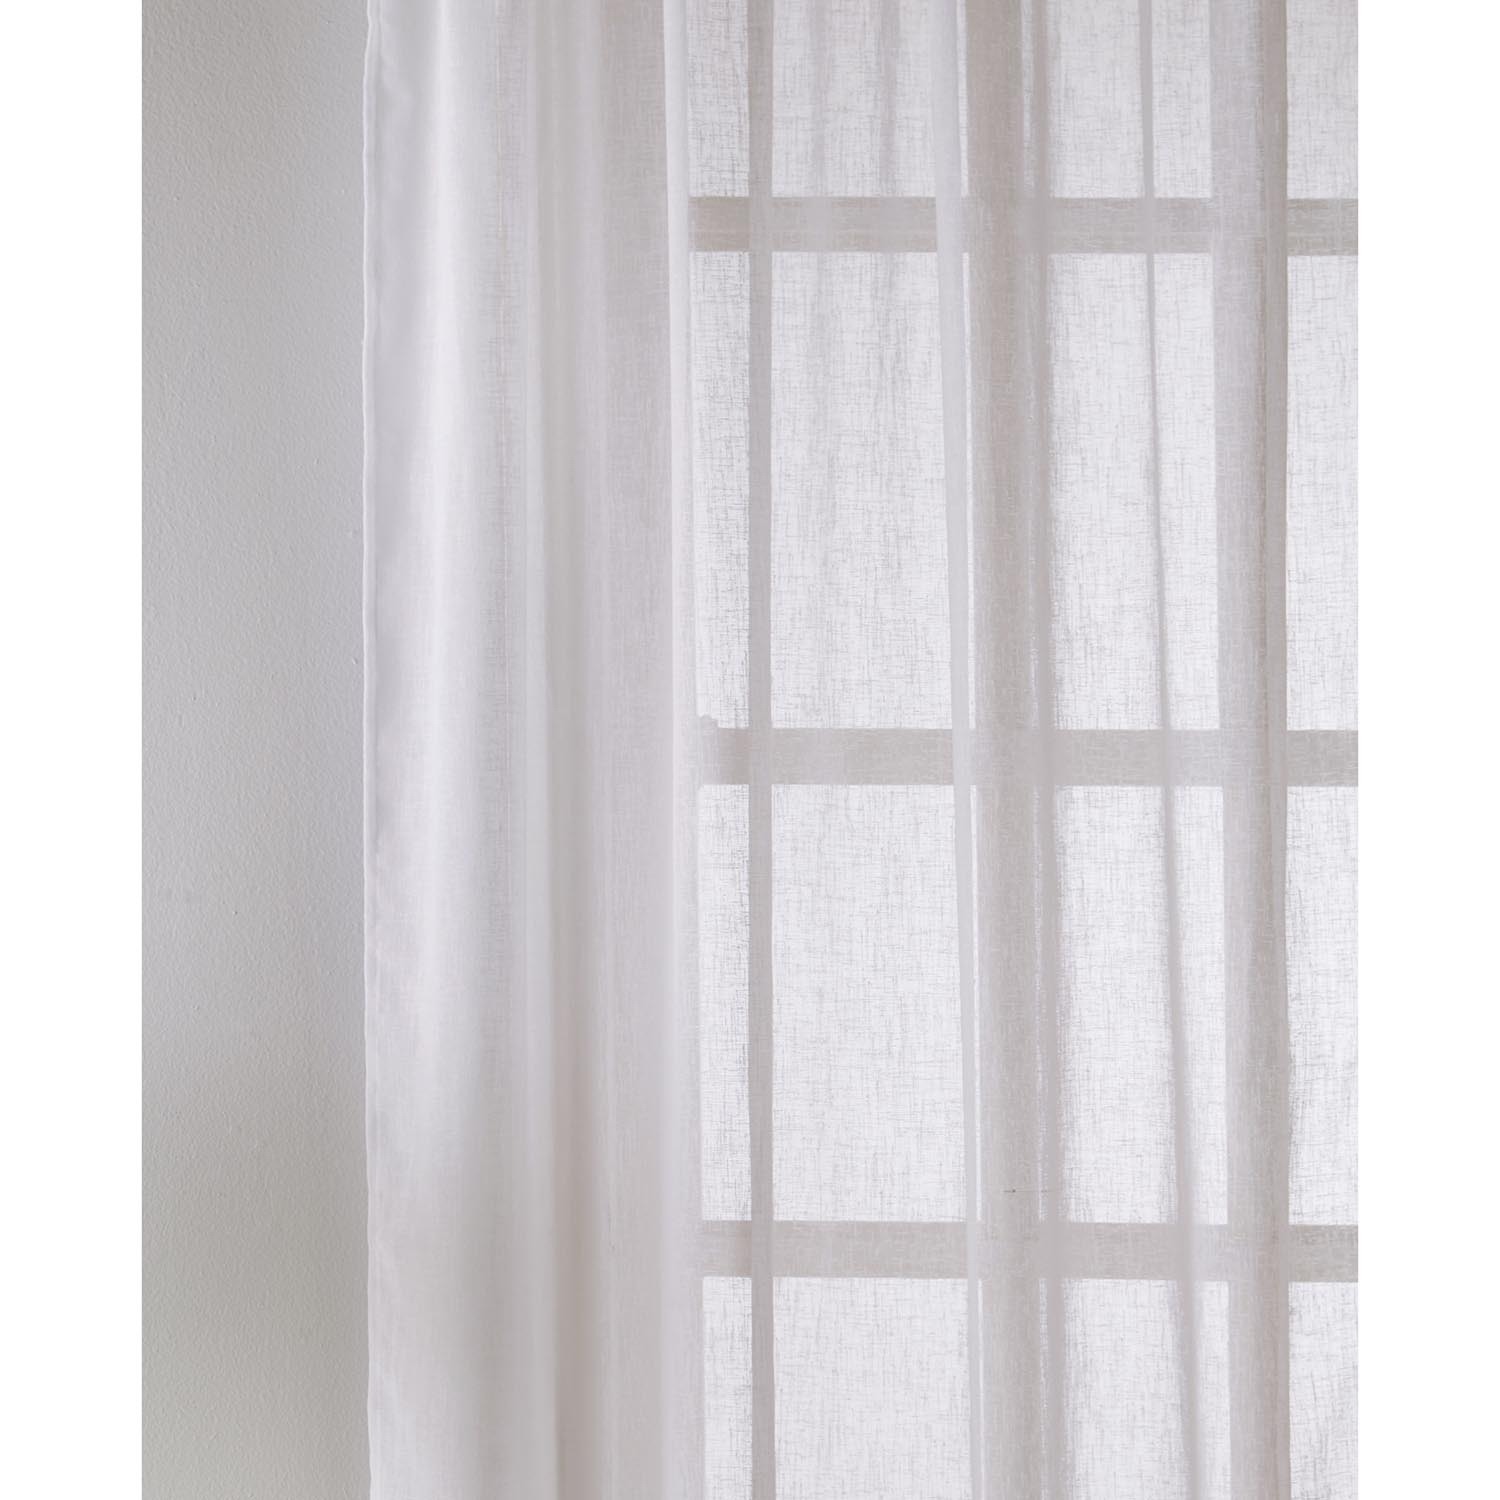 Eden Recycled Textured Voile - White / 122cm Image 2